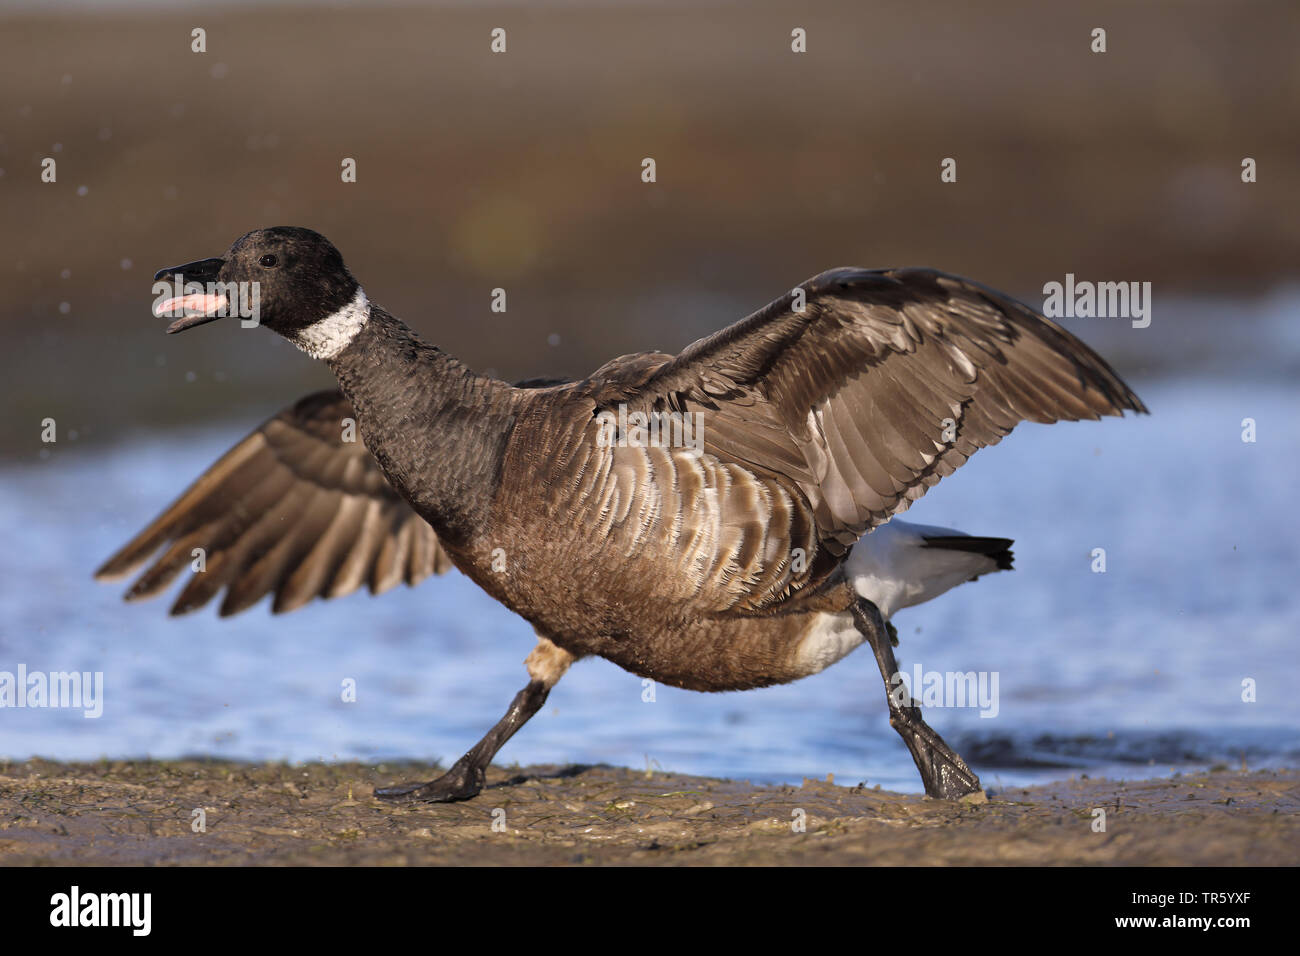 Black Brant (Branta bernicla nigricans, Branta nigricans), démarrage, sticking tongue out, USA, Floride, Fort Myers Beach Banque D'Images